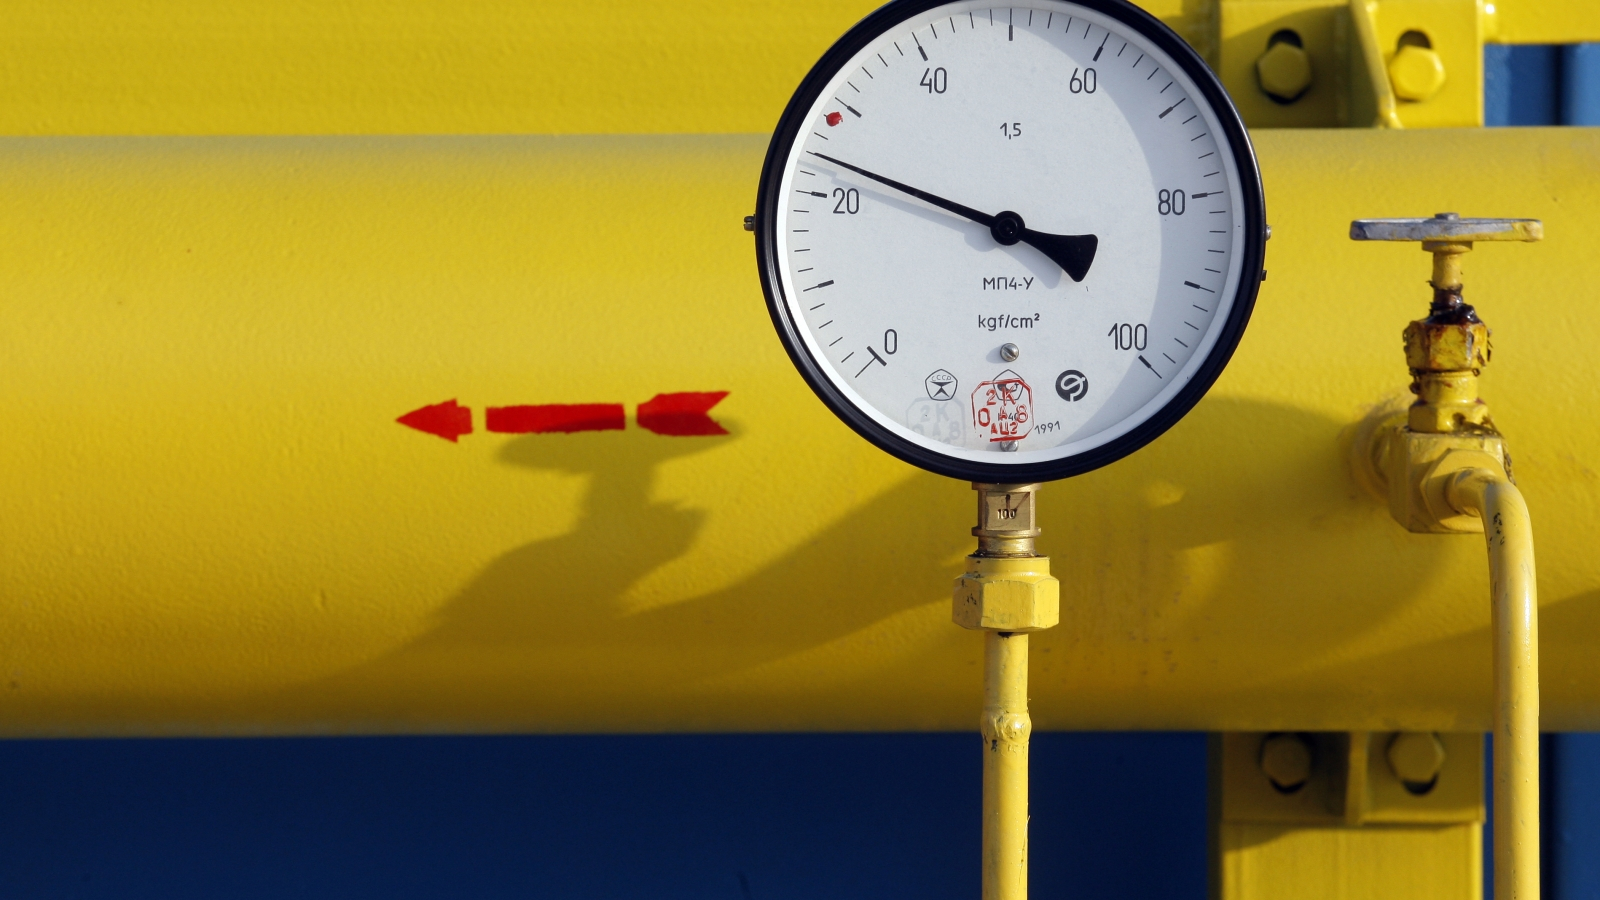 EU4Energy: New methodology for calculating natural gas transmission tariffs in Georgia